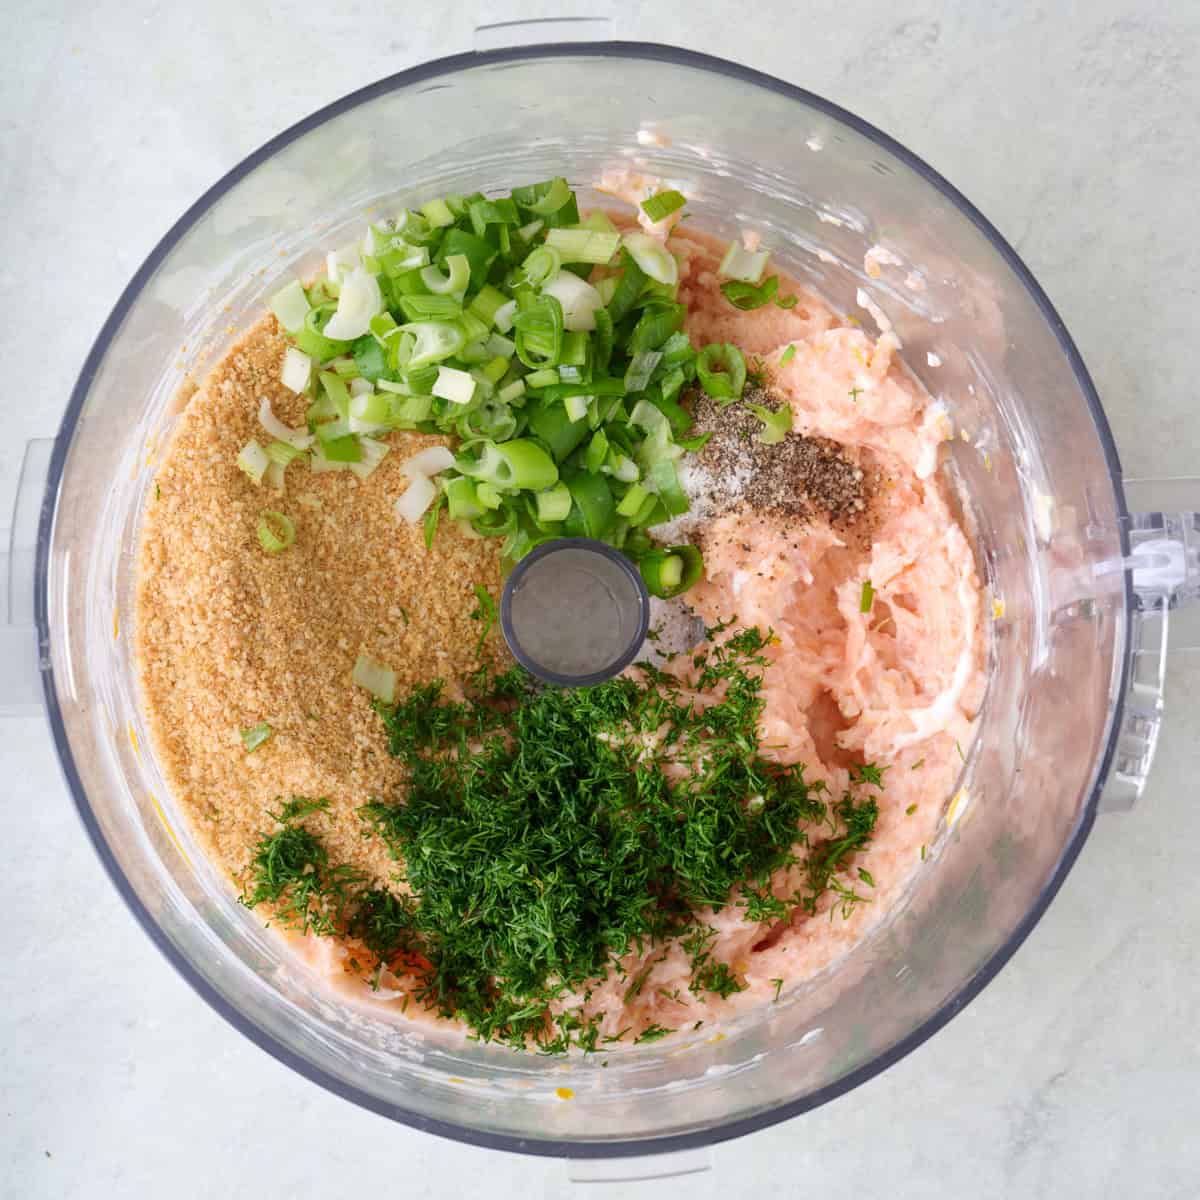 Salmon mixture, dill, scallions, and breadcrumbs in the bowl of a food processor.